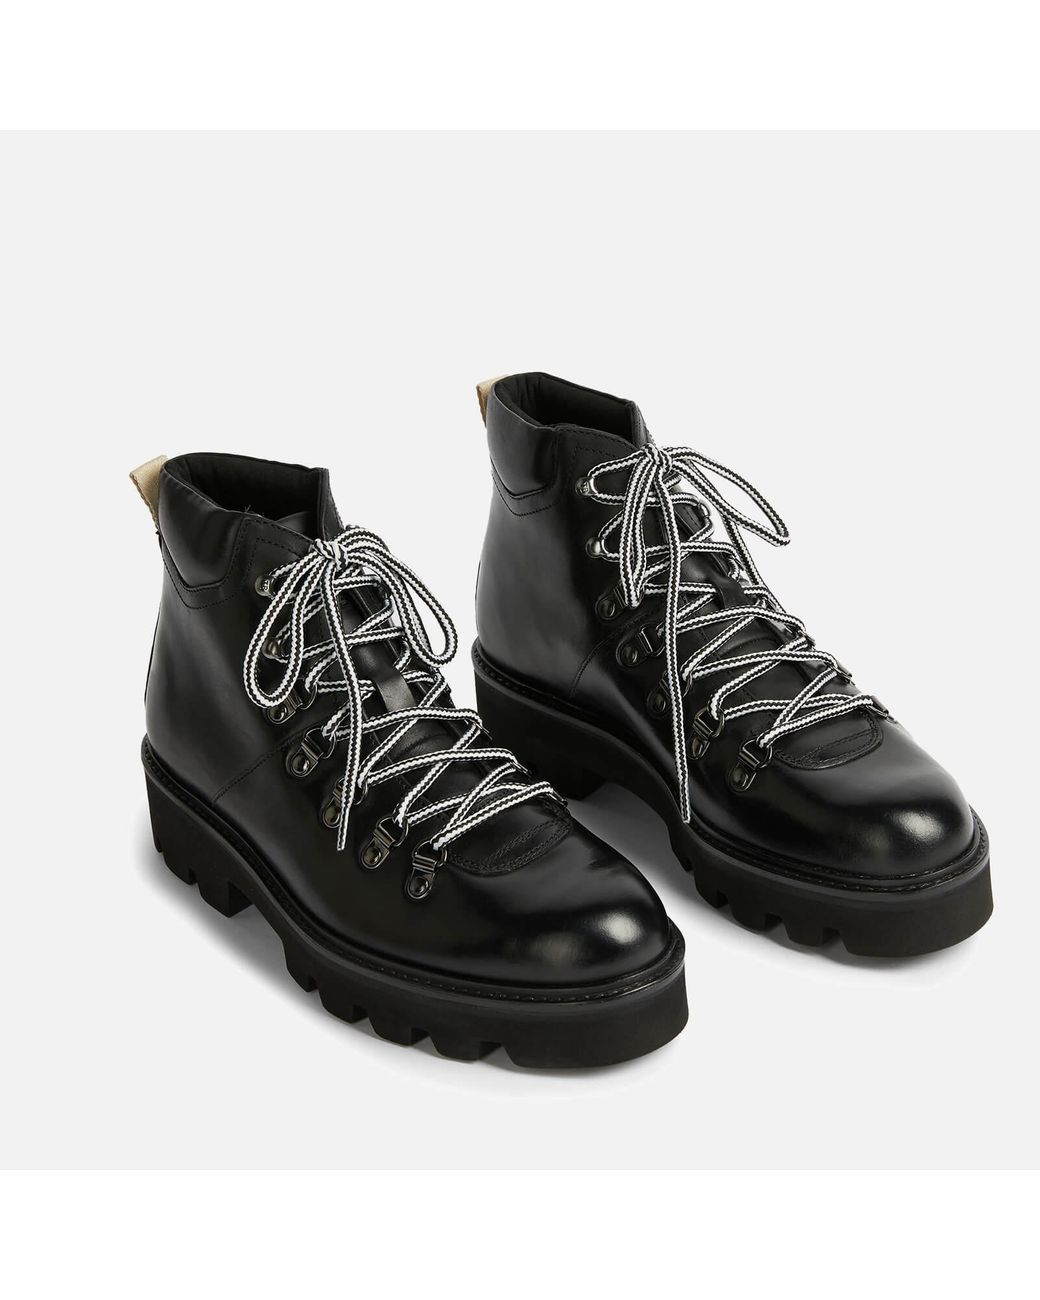 Ted Baker Ammella Leather Hiking Style Boots in Black - Lyst